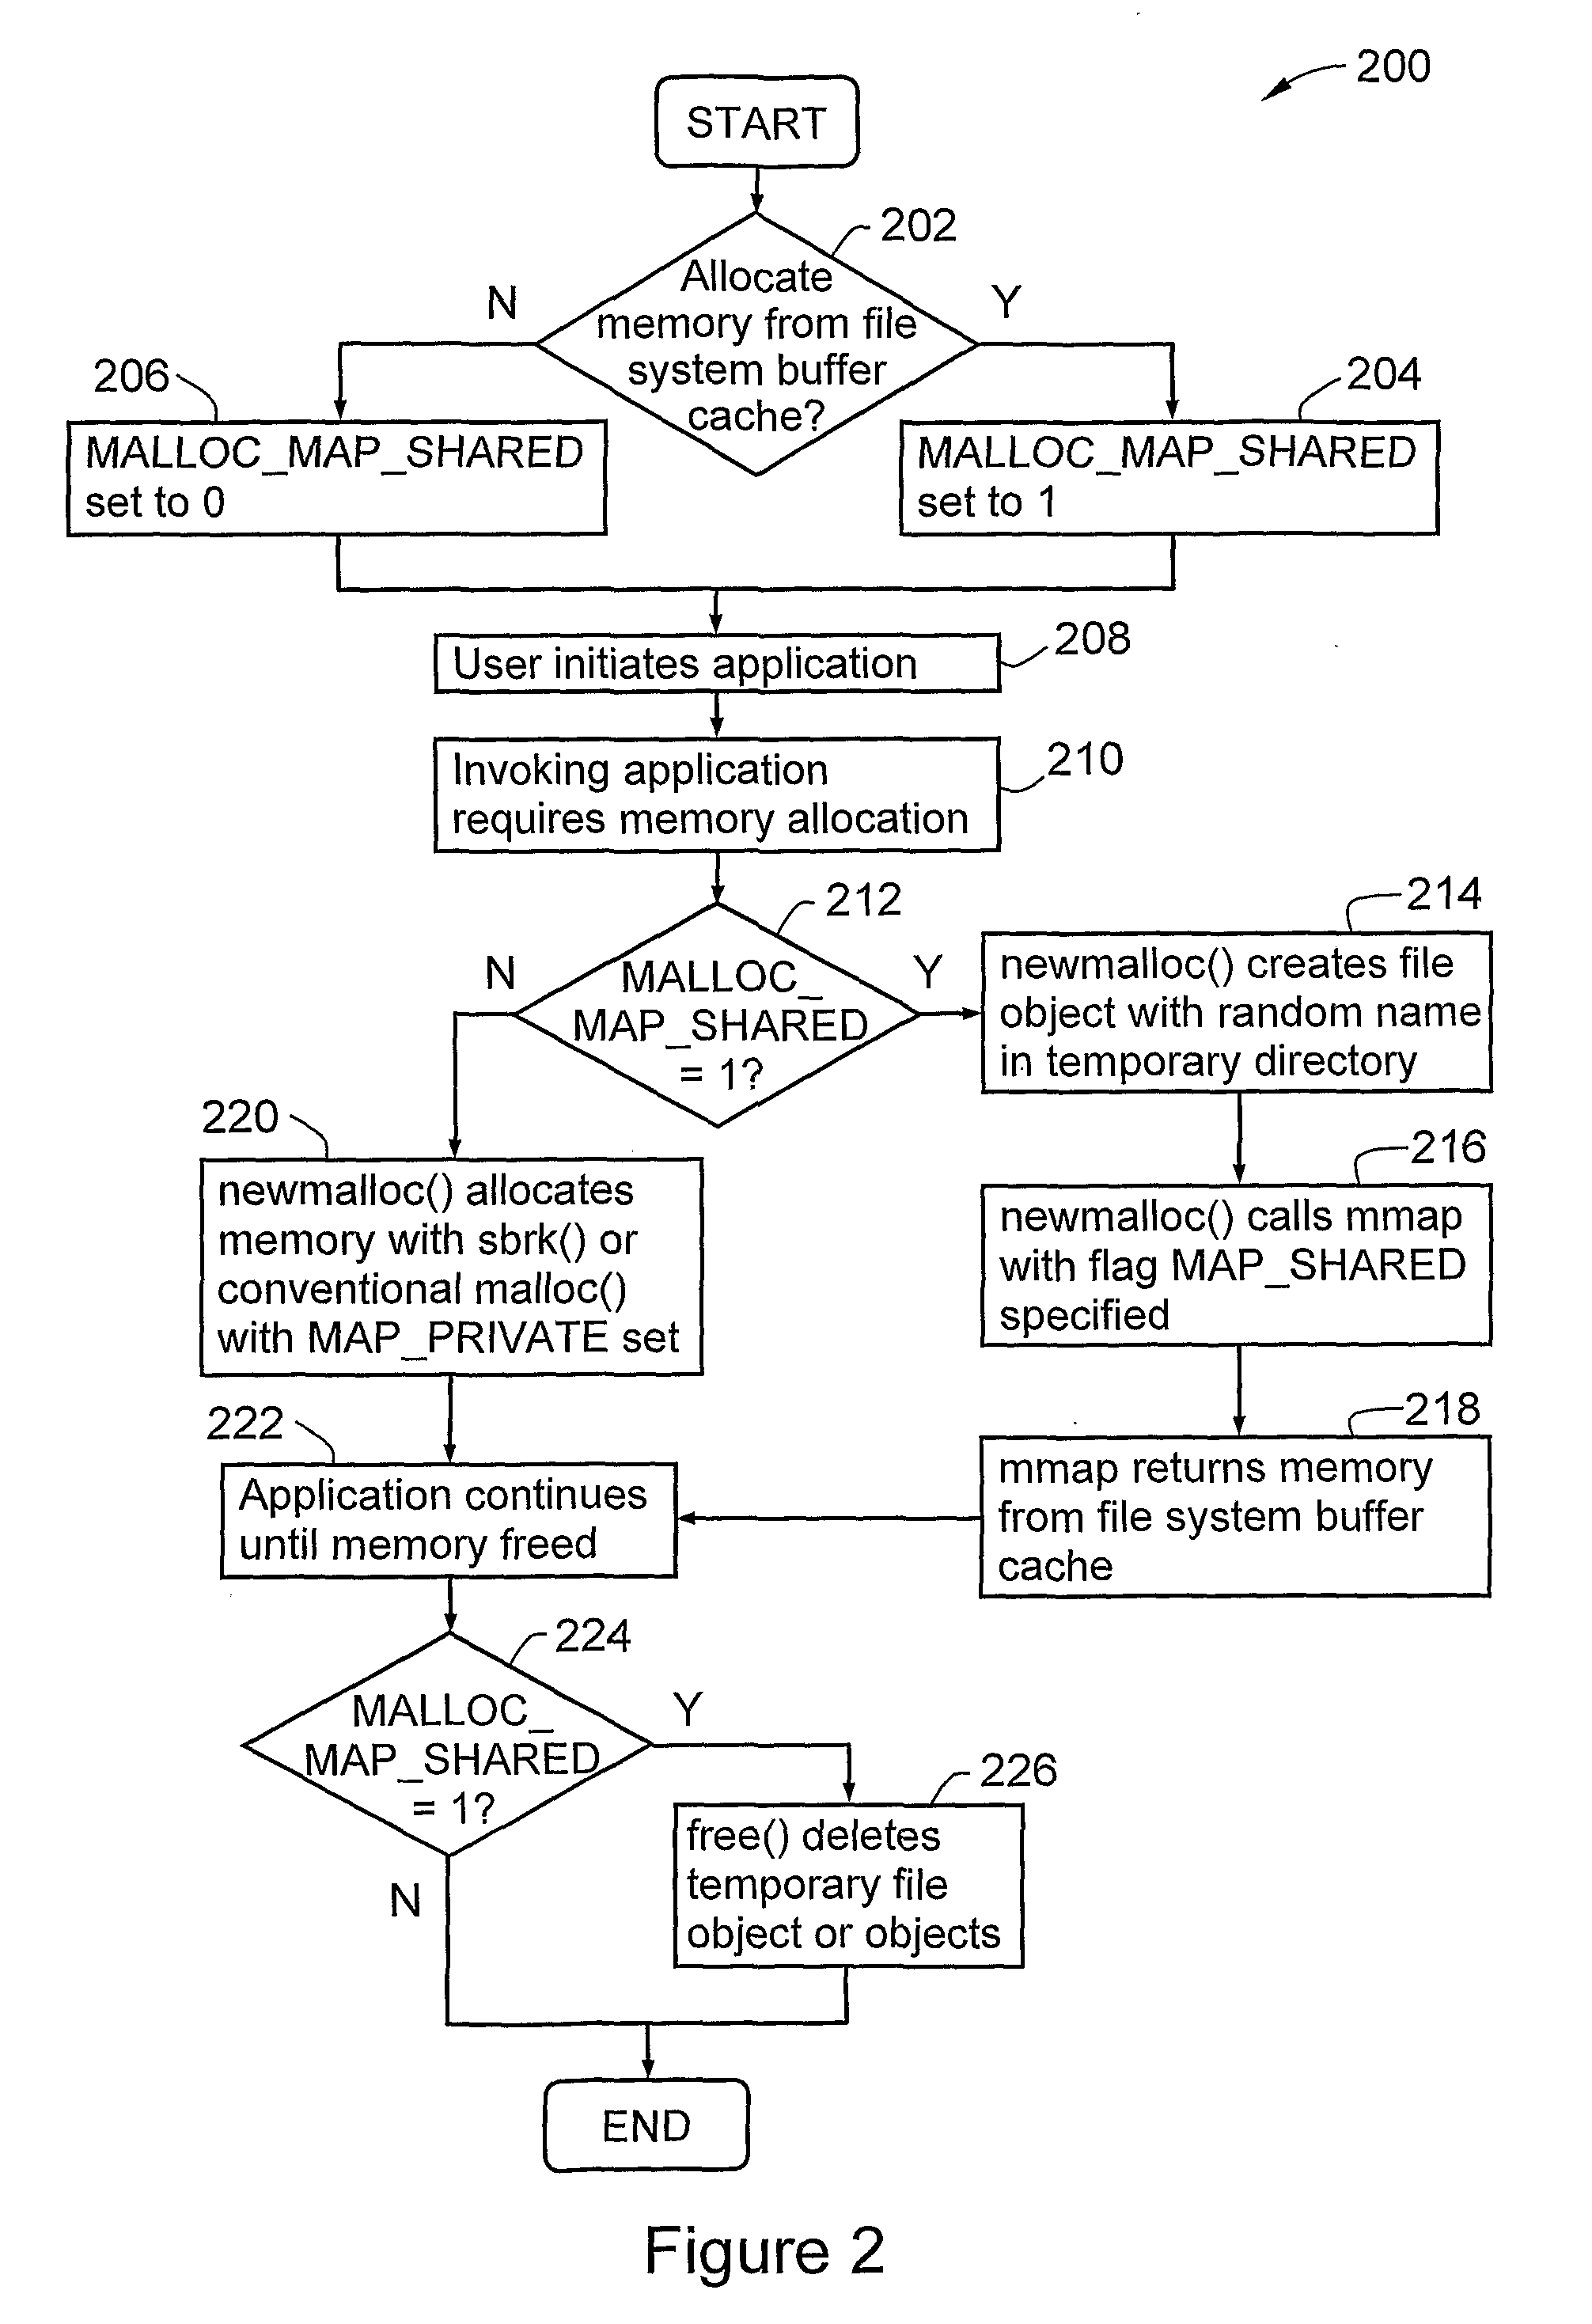 Method and System for Allocating Memory in a Computing Environment